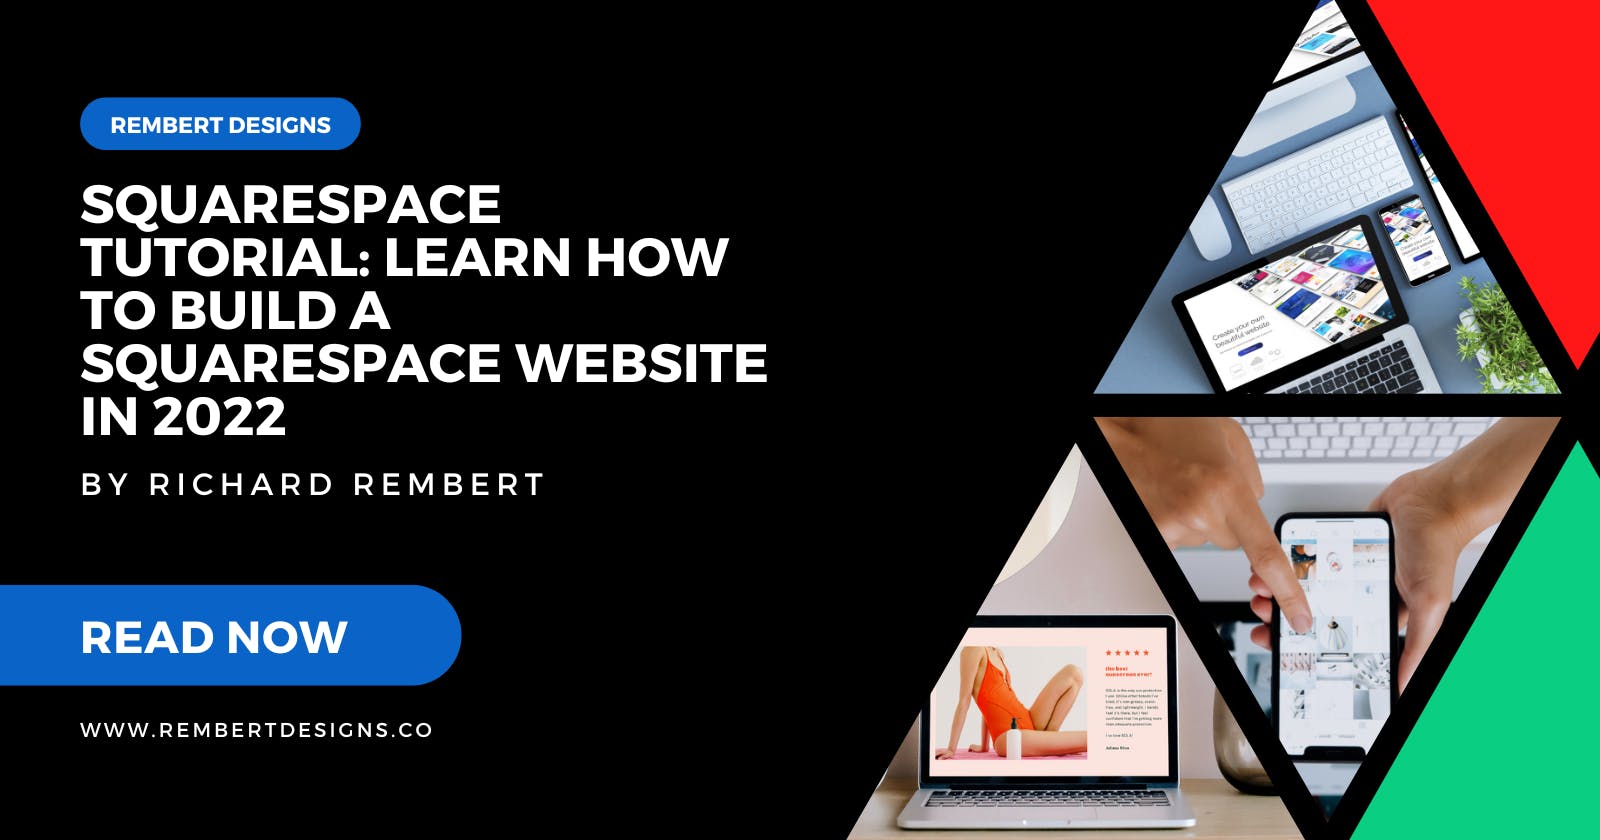 Squarespace Tutorial: Learn How to Build a Squarespace Website in 2022